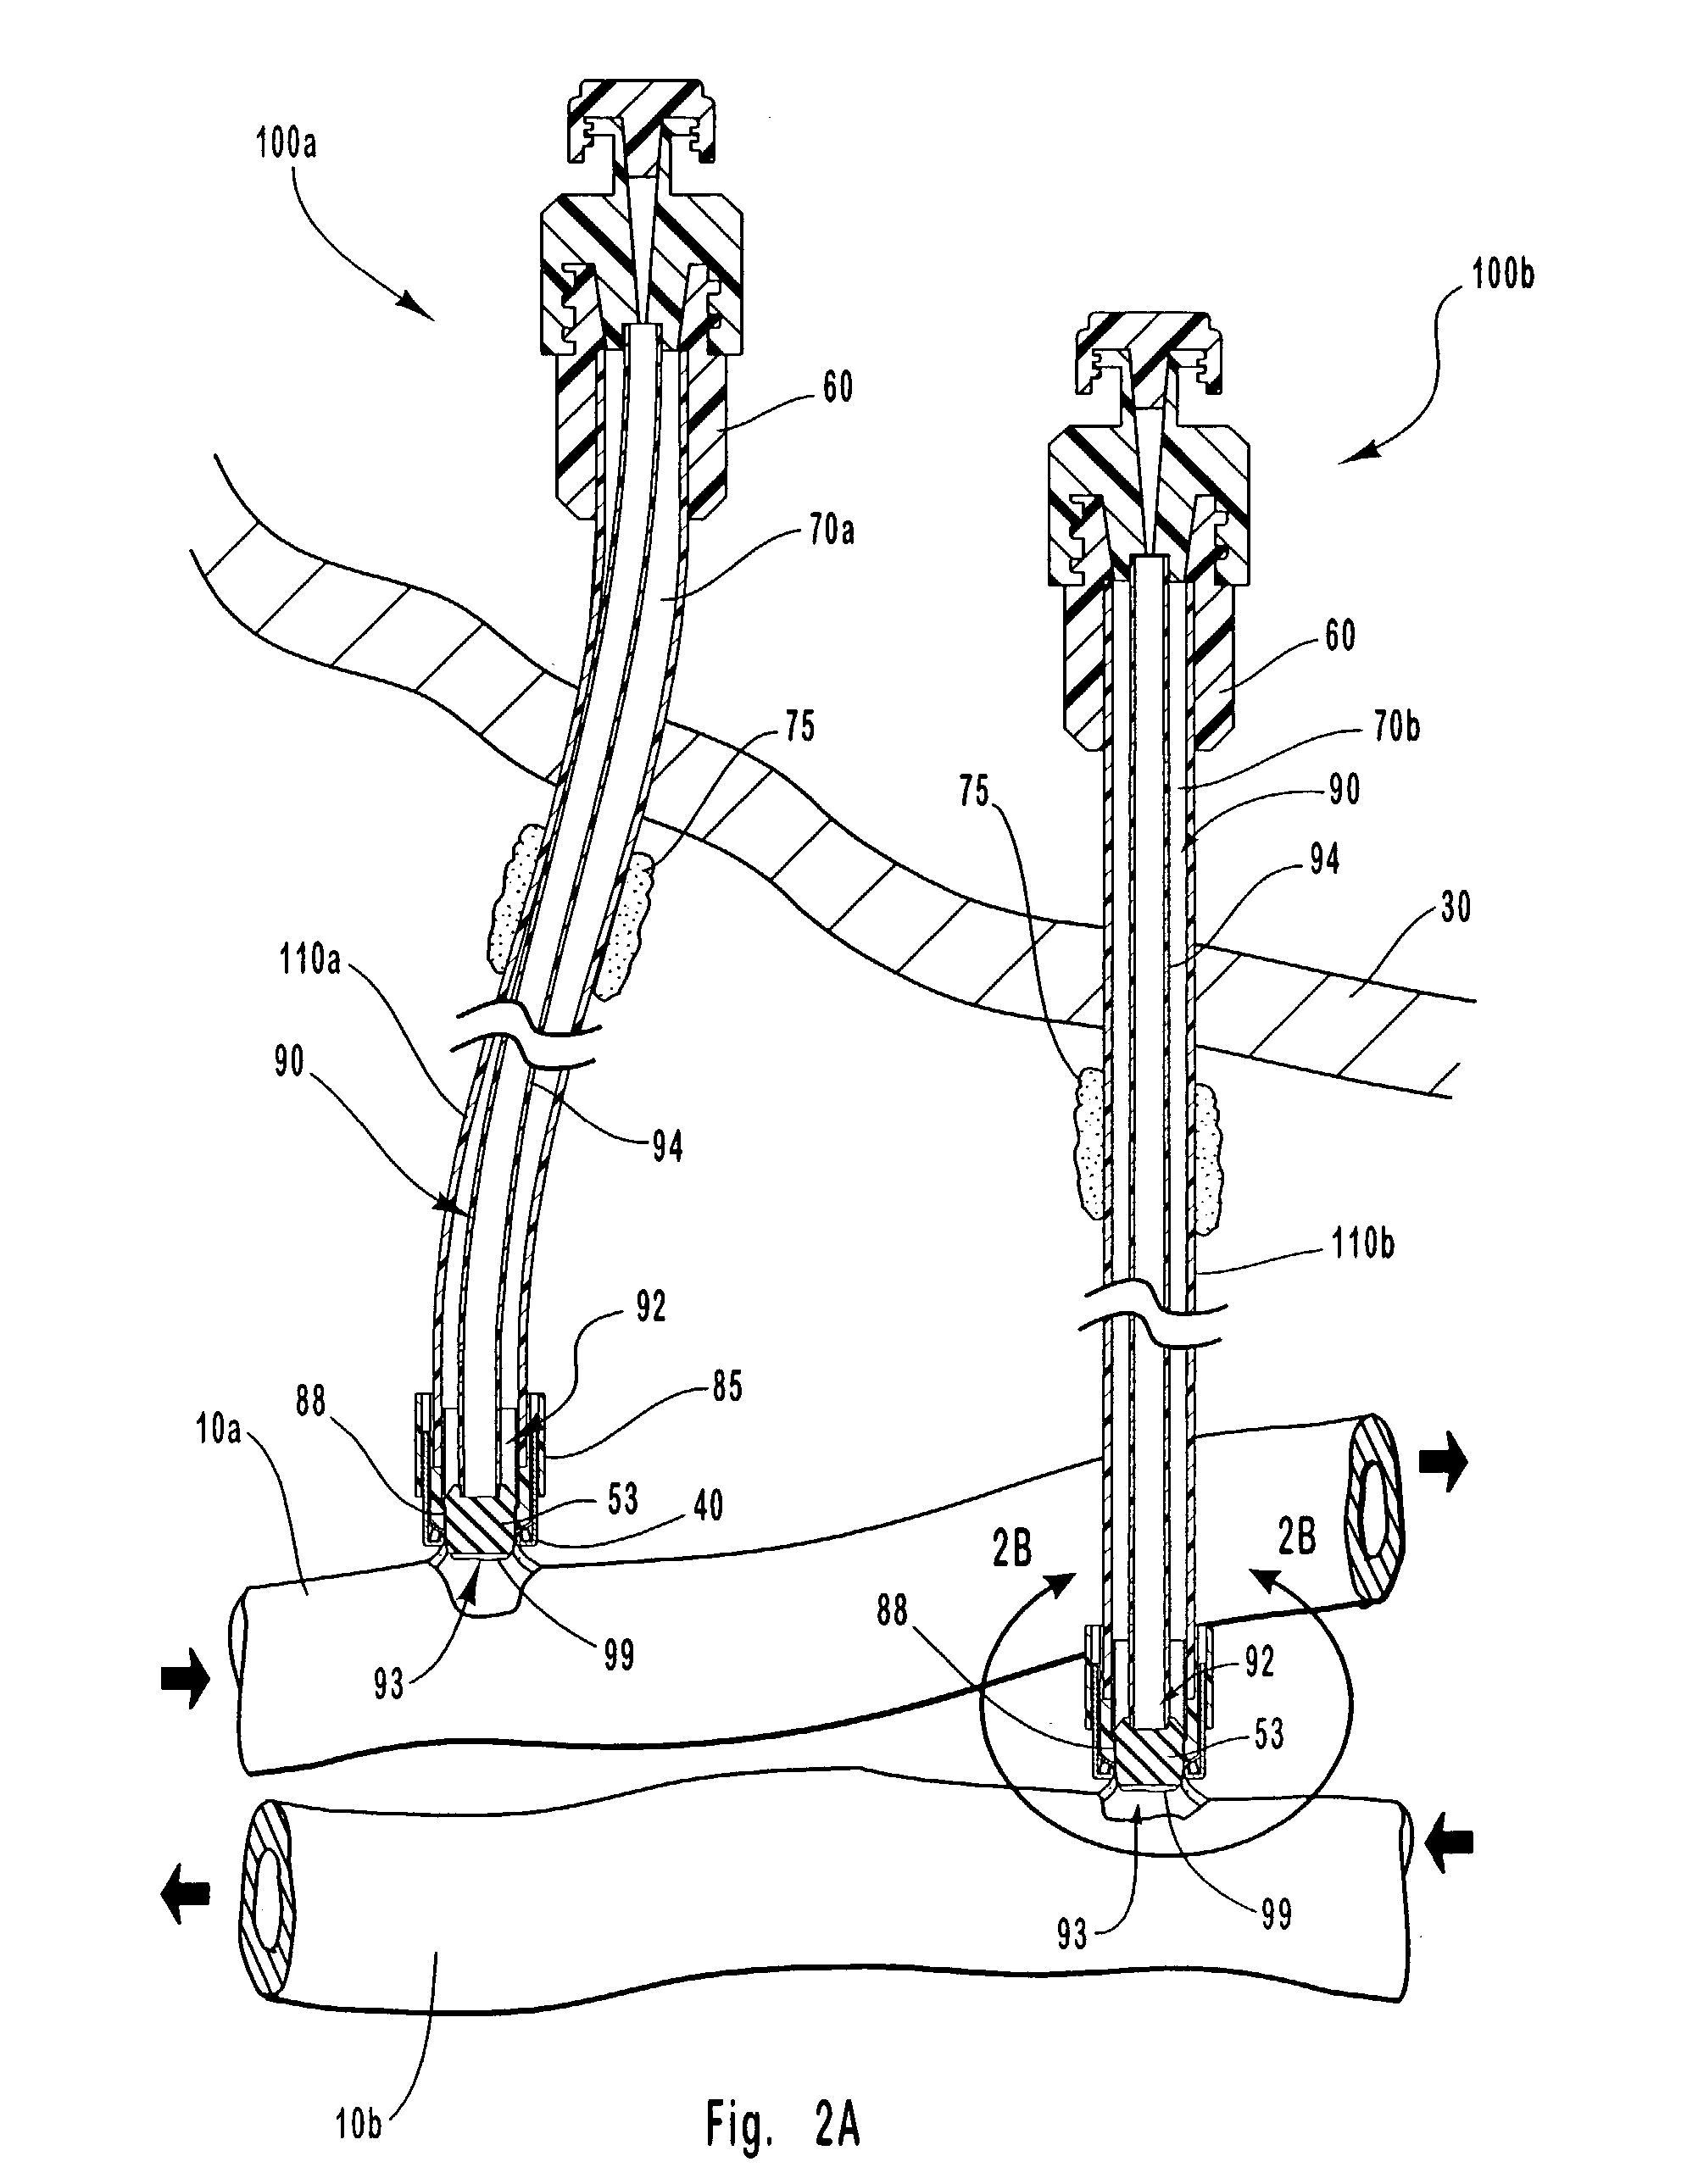 Apparatus and methods for occluding an access tube anastomosed to sidewall of an anatomical vessel